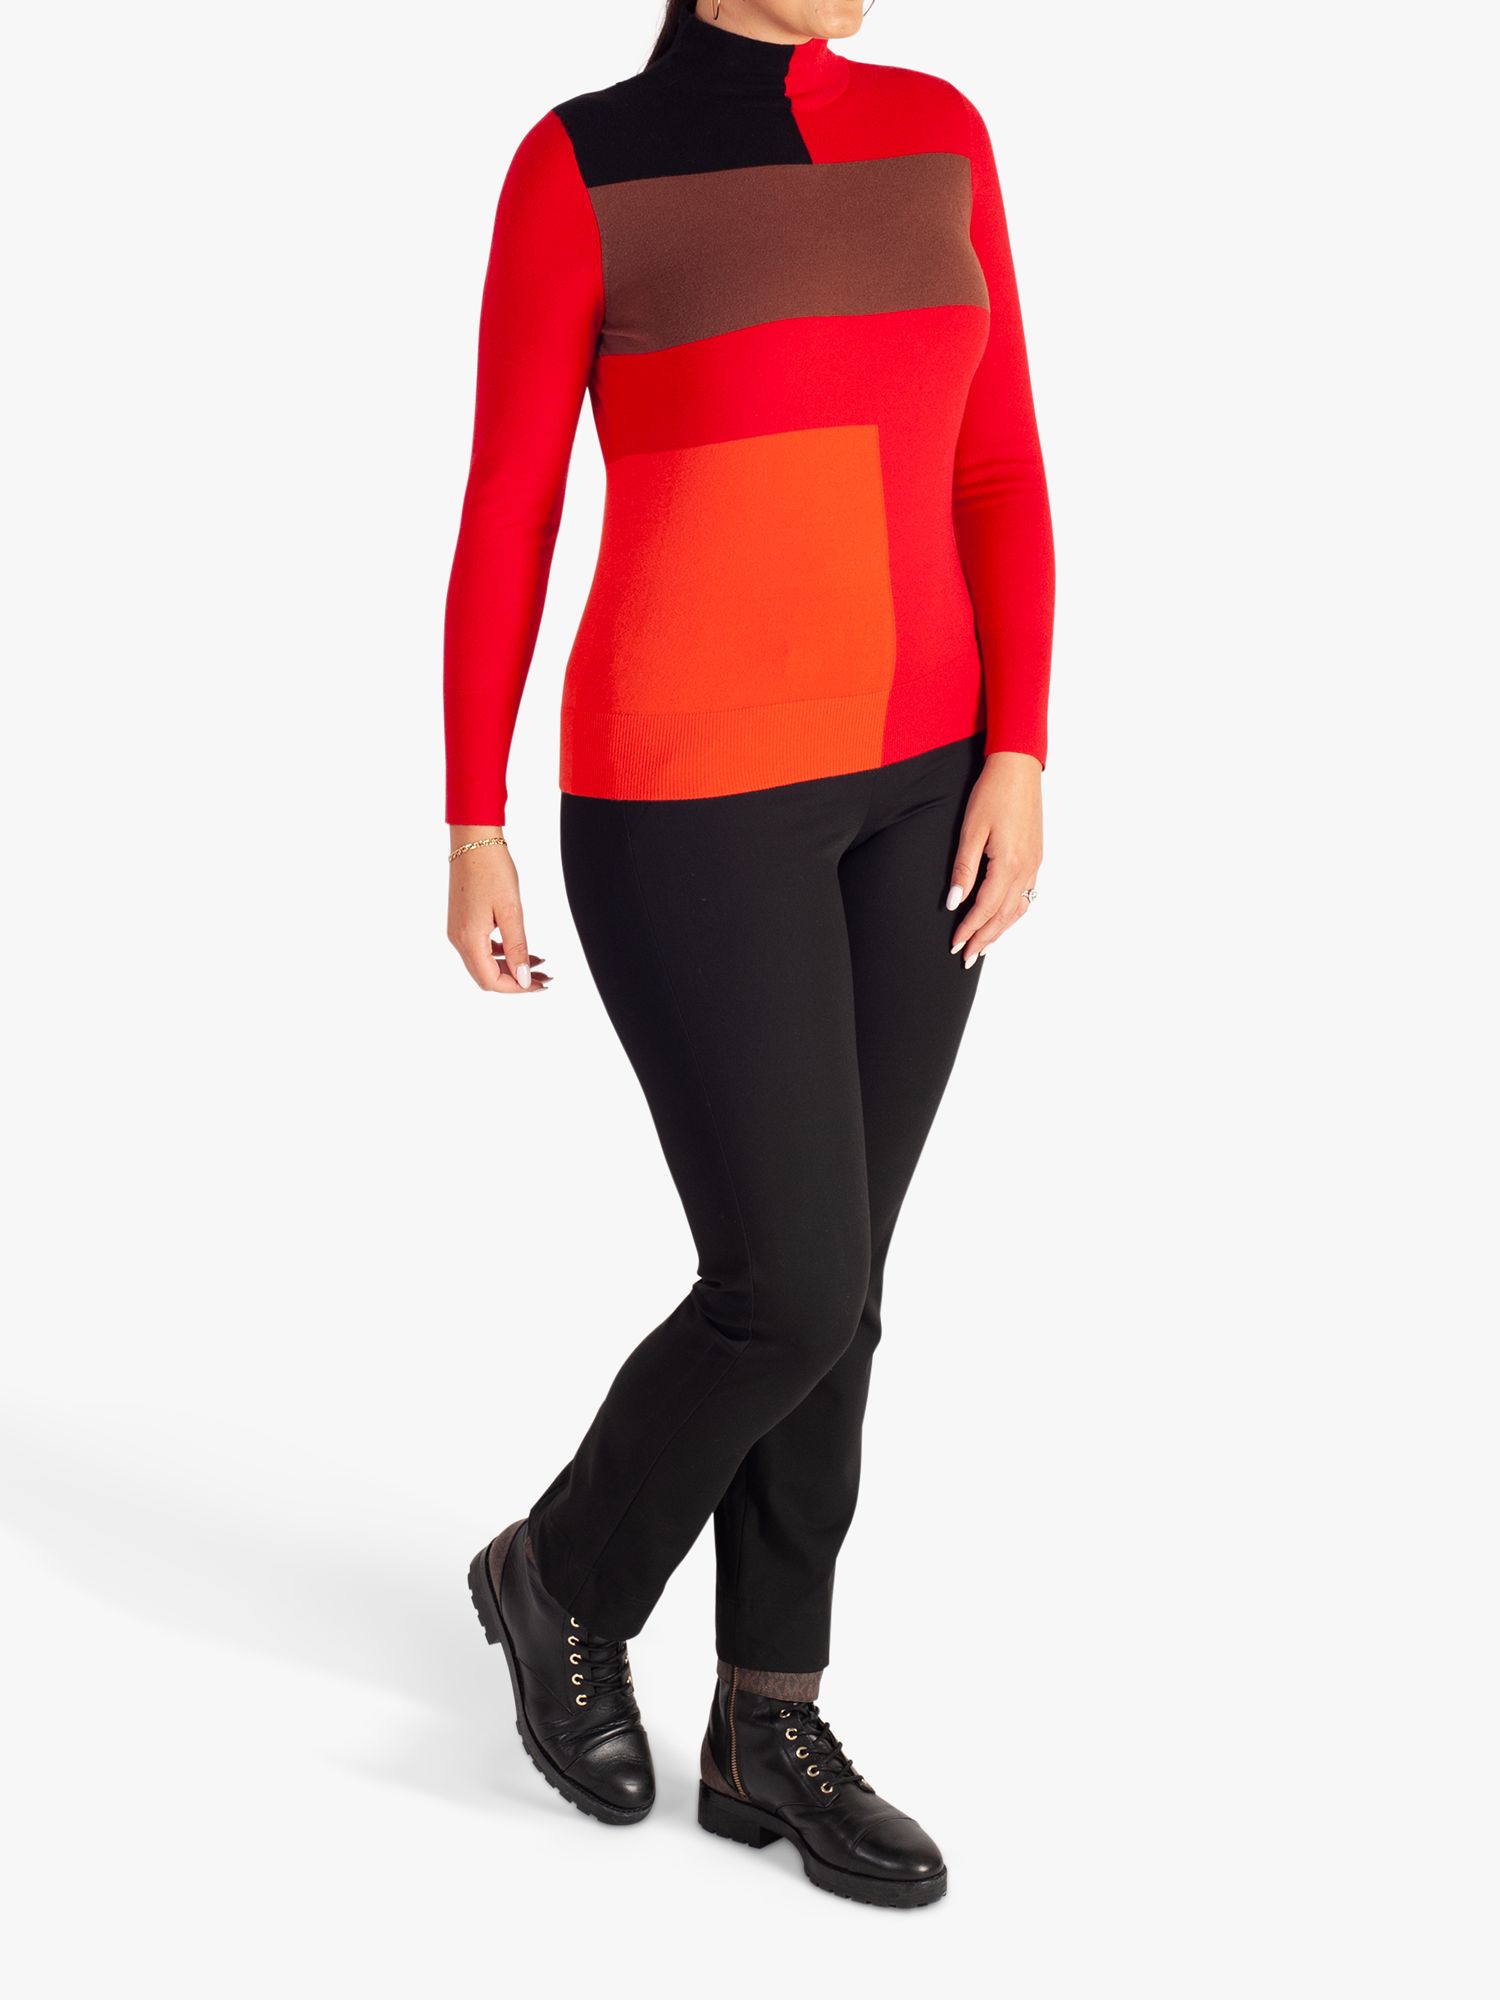 chesca Shapes Jumper, Red, 18-20